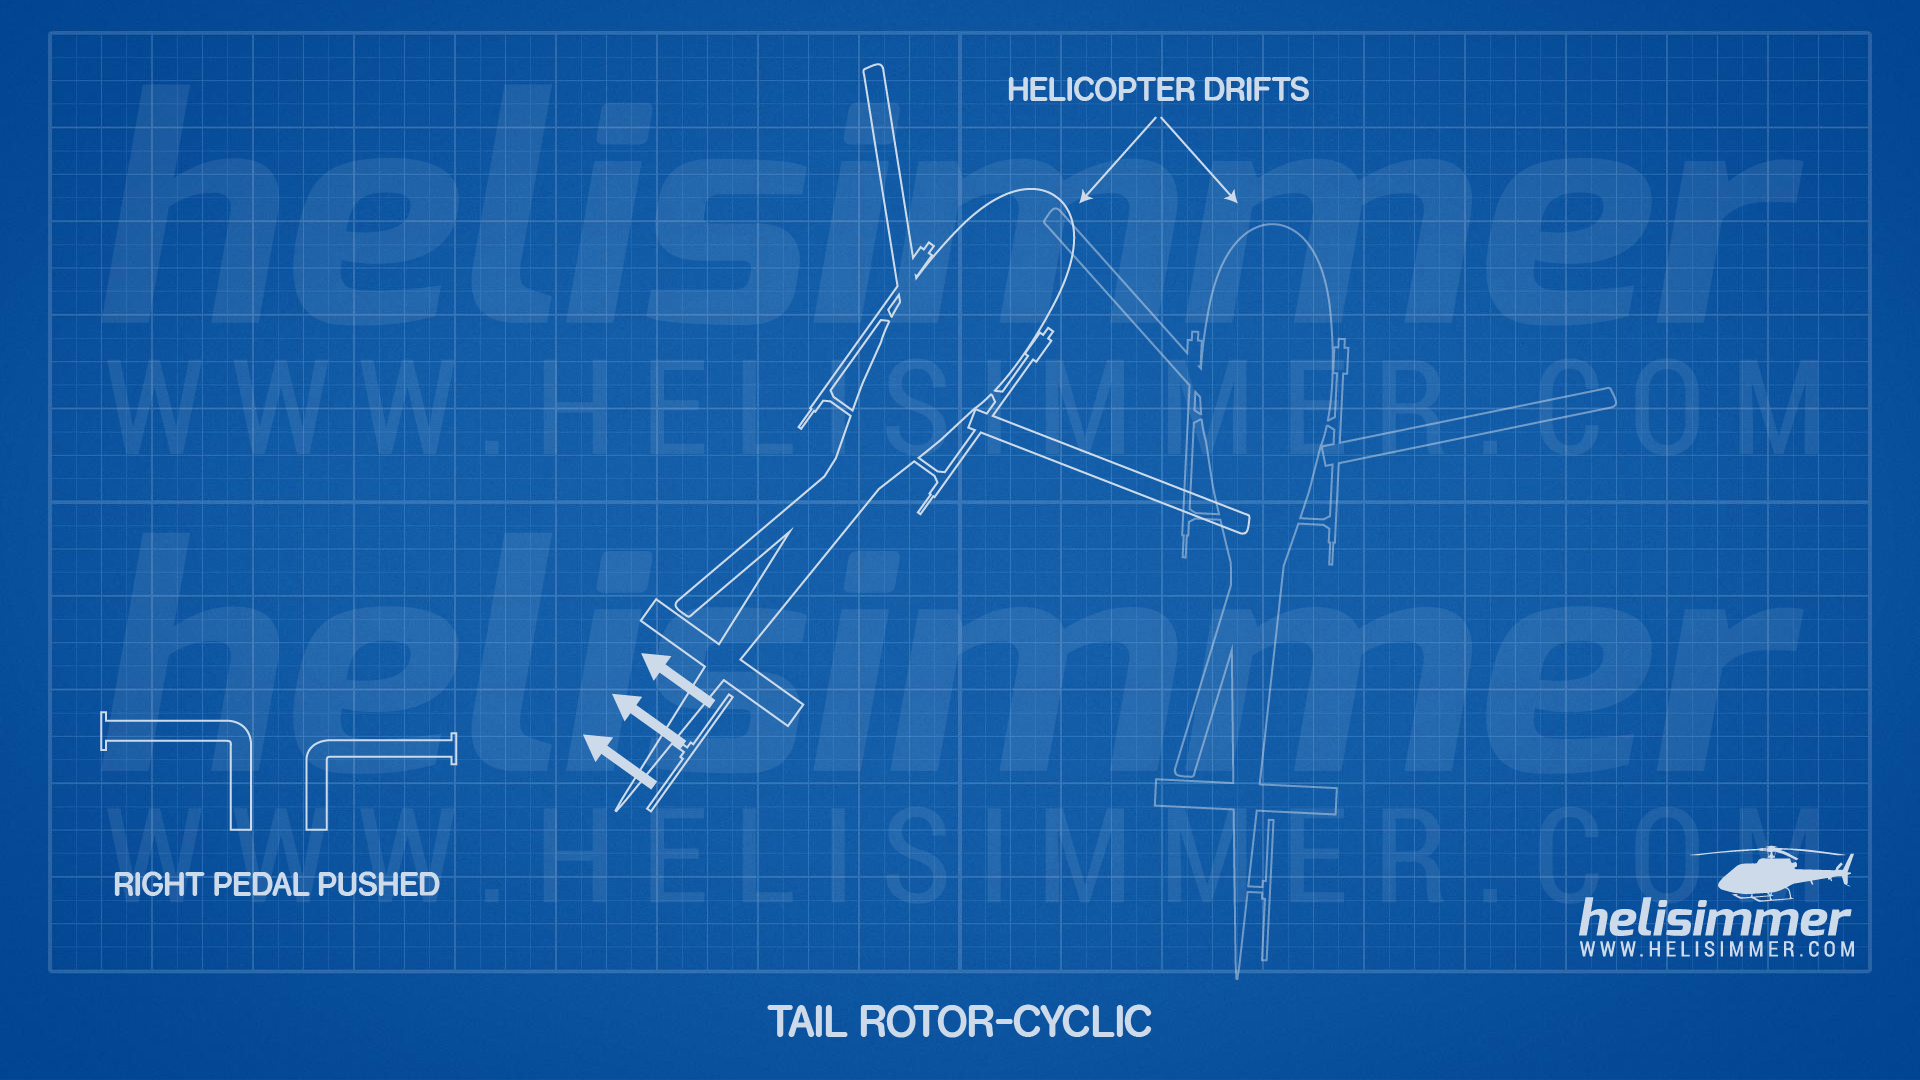 Tail Rotor pushes the helicopter sideways